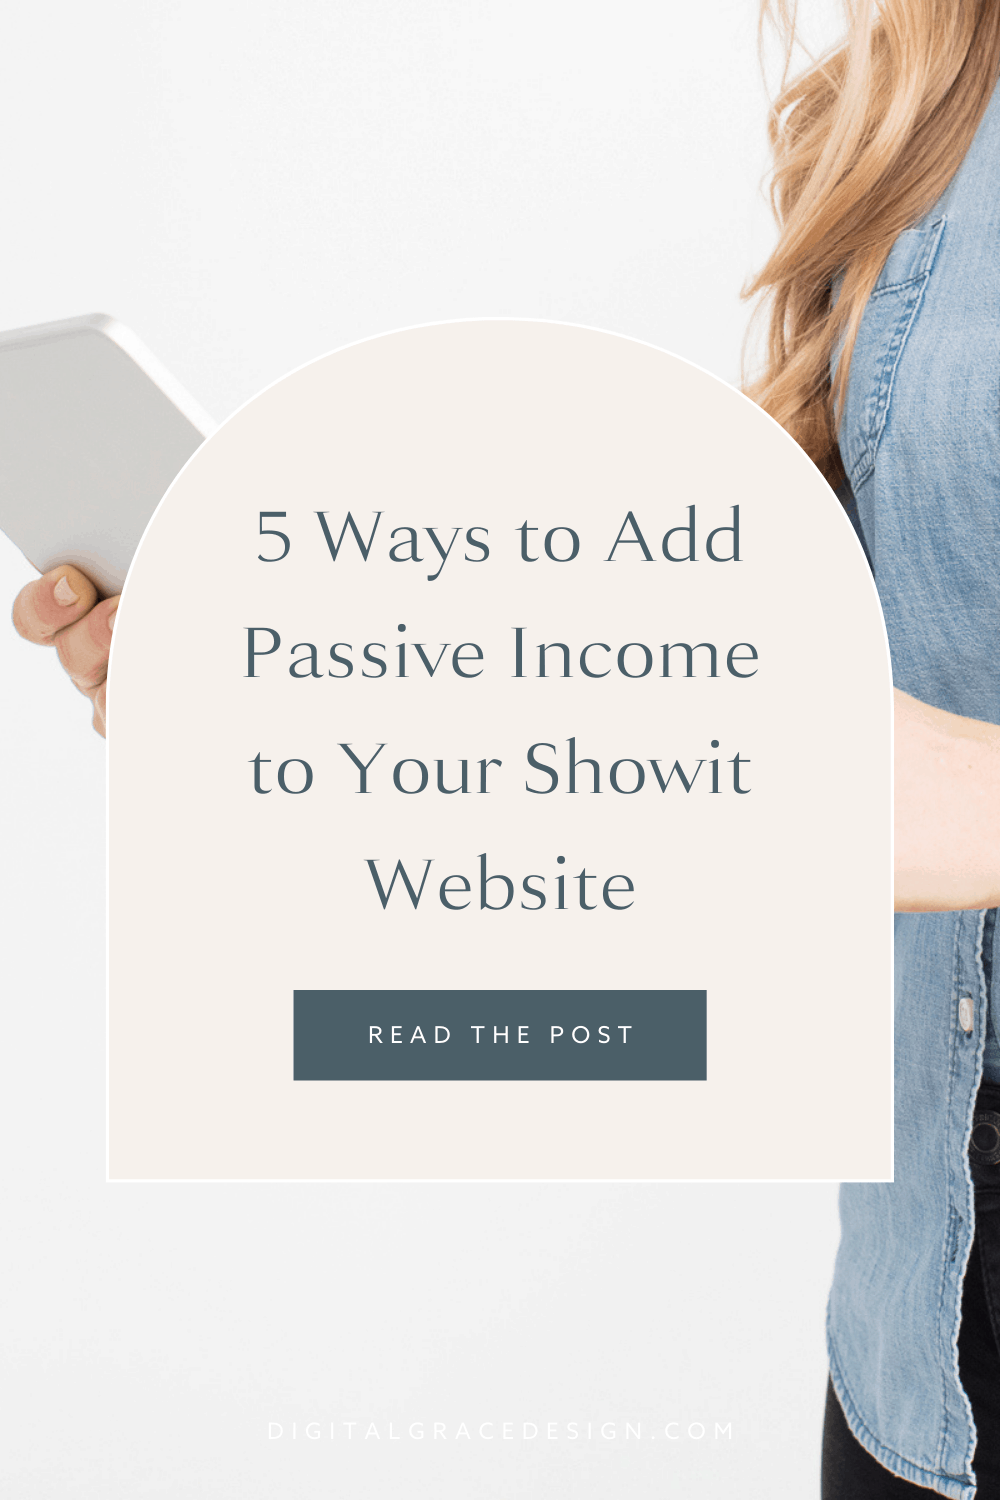 5 Ways to Add Passive Income to Your Showit Website